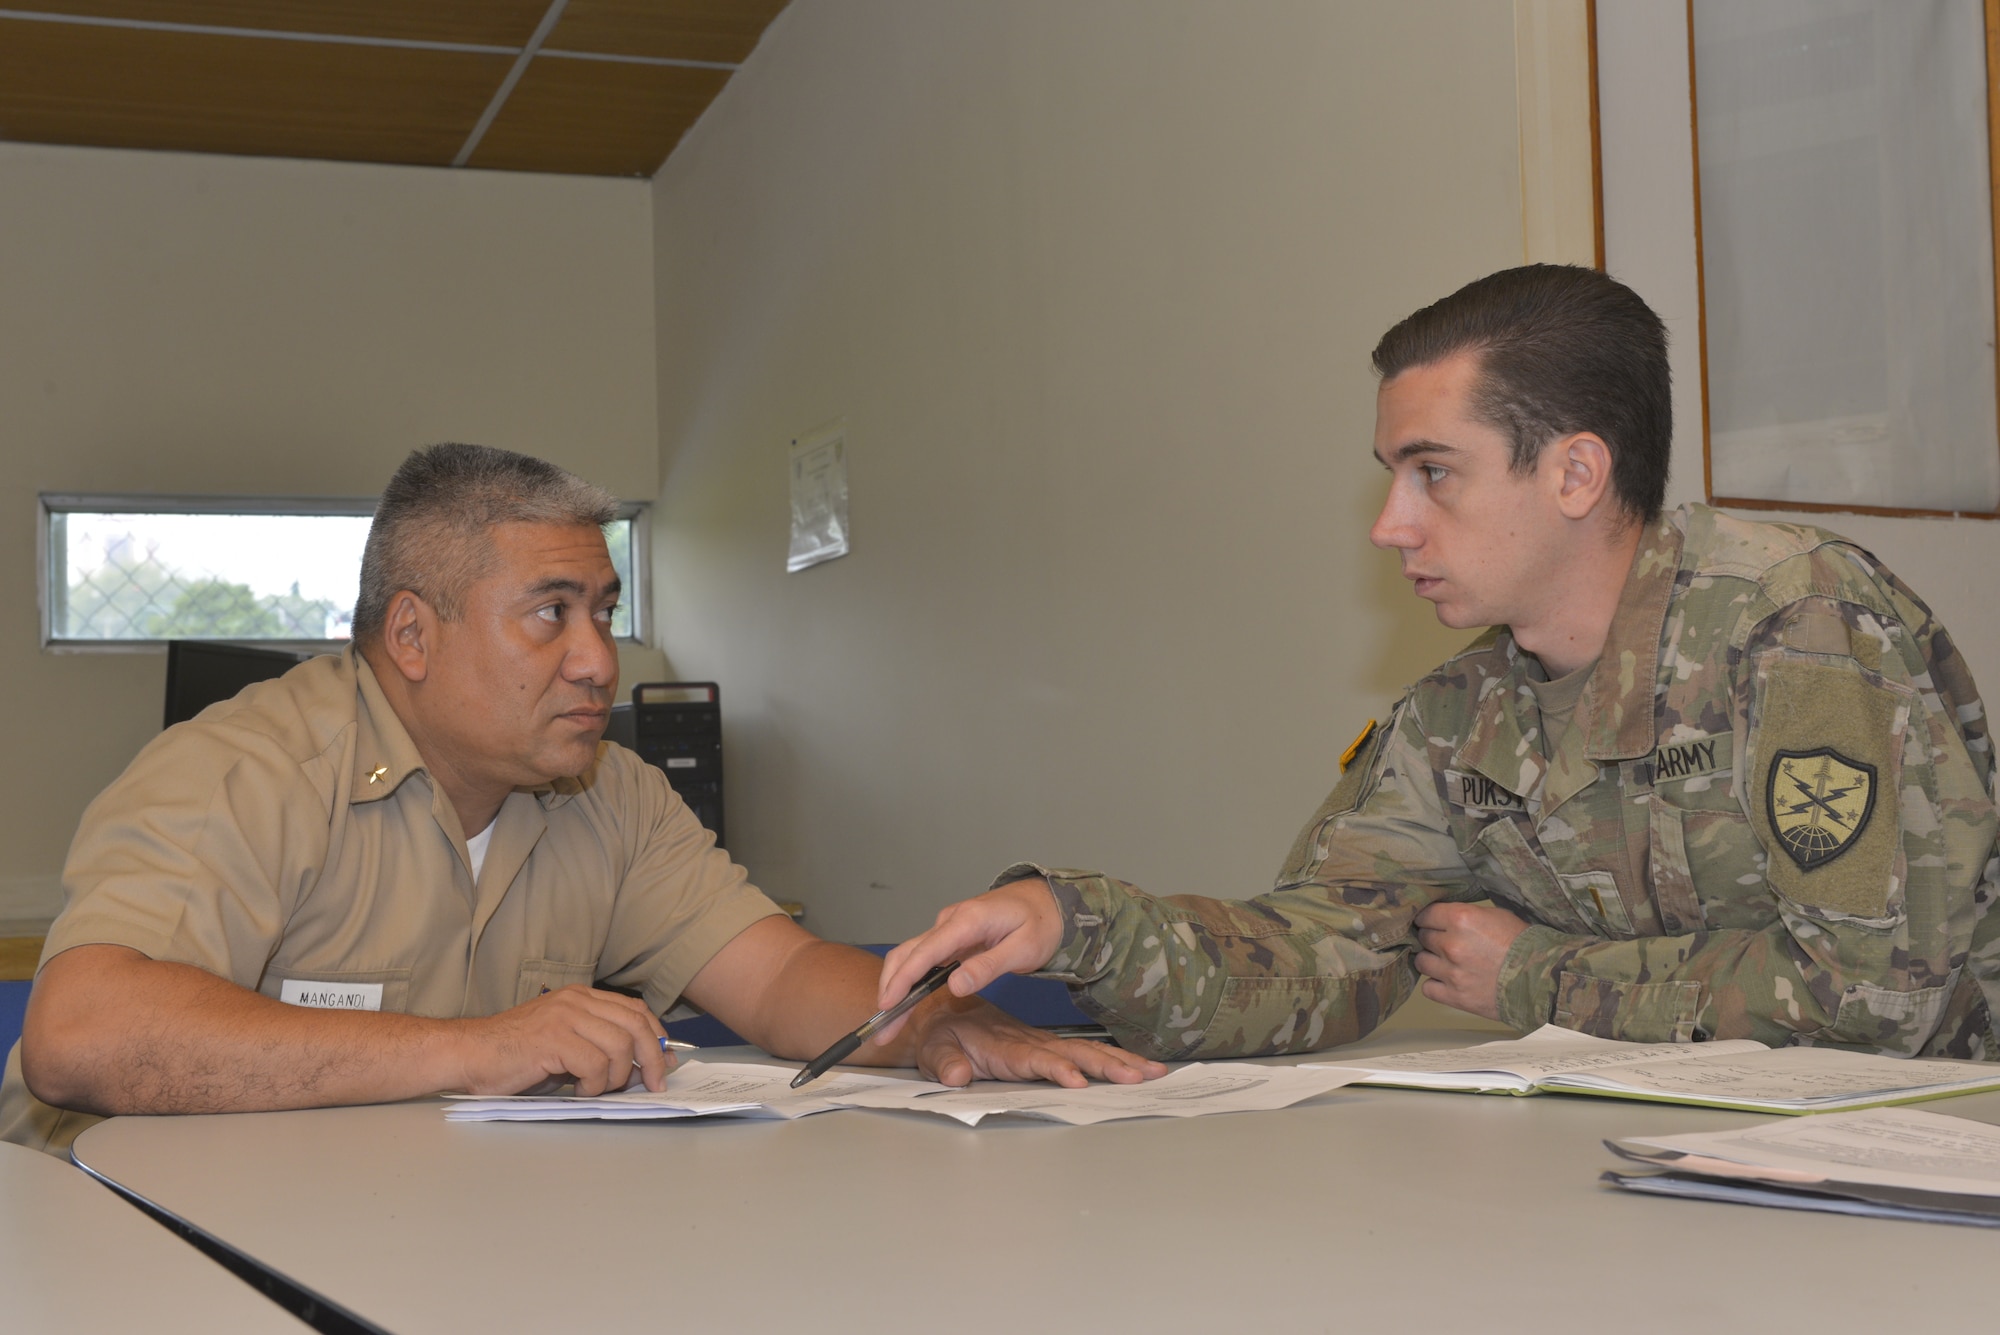 A New Hampshire Army National Guard Soldier speaks with a Salvadoran navy officer.